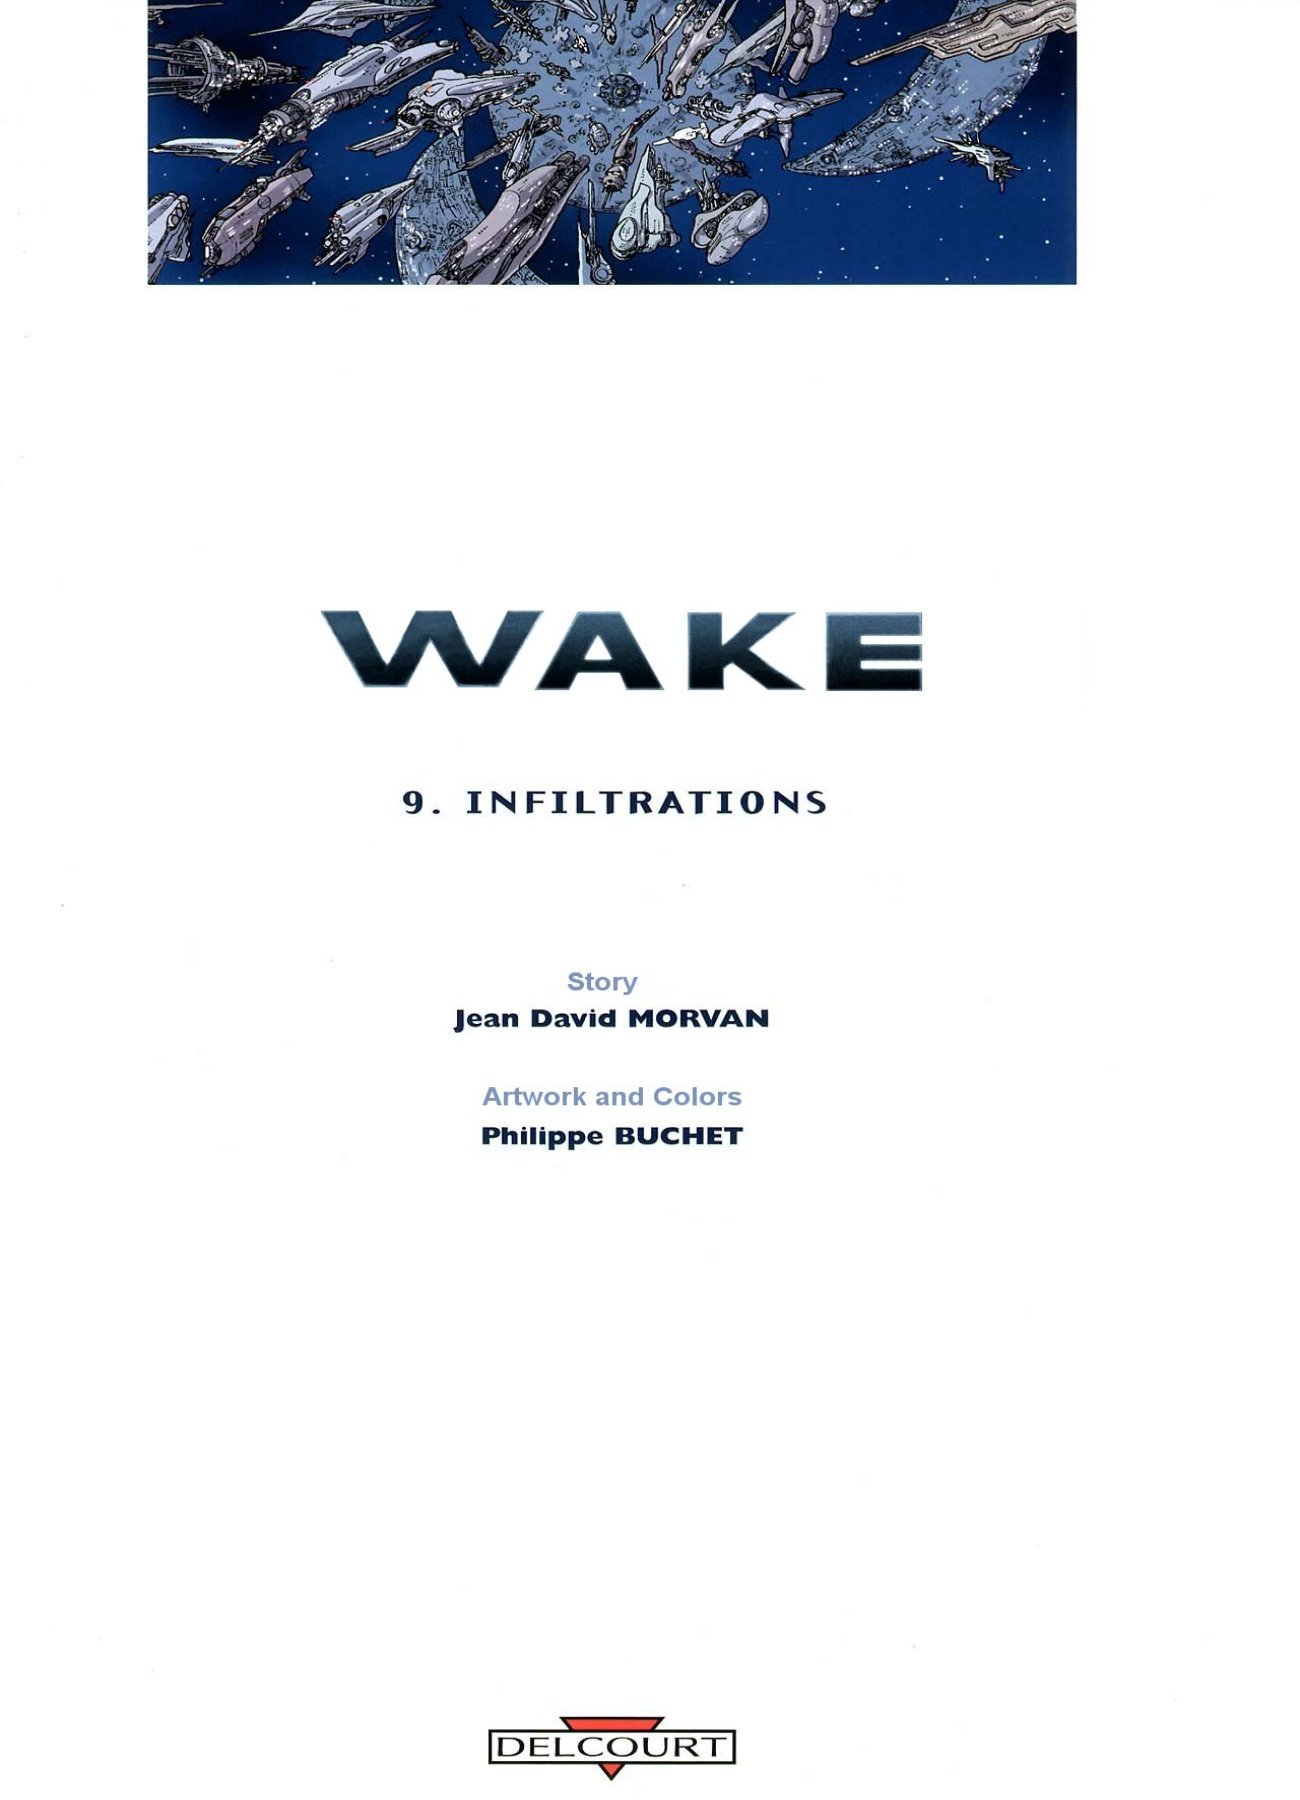 Read online Wake comic -  Issue #9 - 3